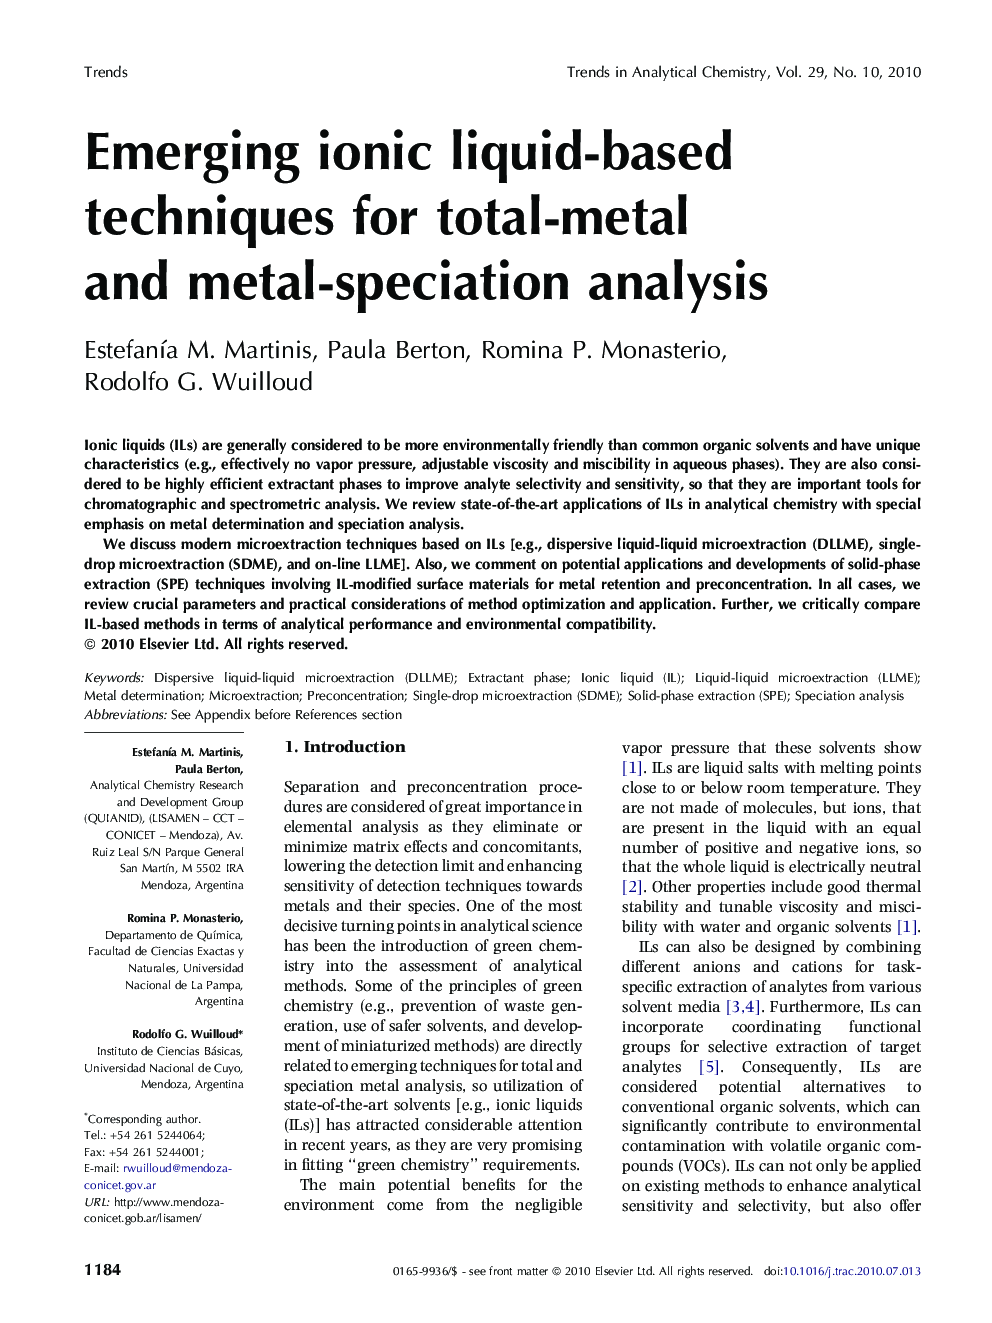 Emerging ionic liquid-based techniques for total-metal and metal-speciation analysis